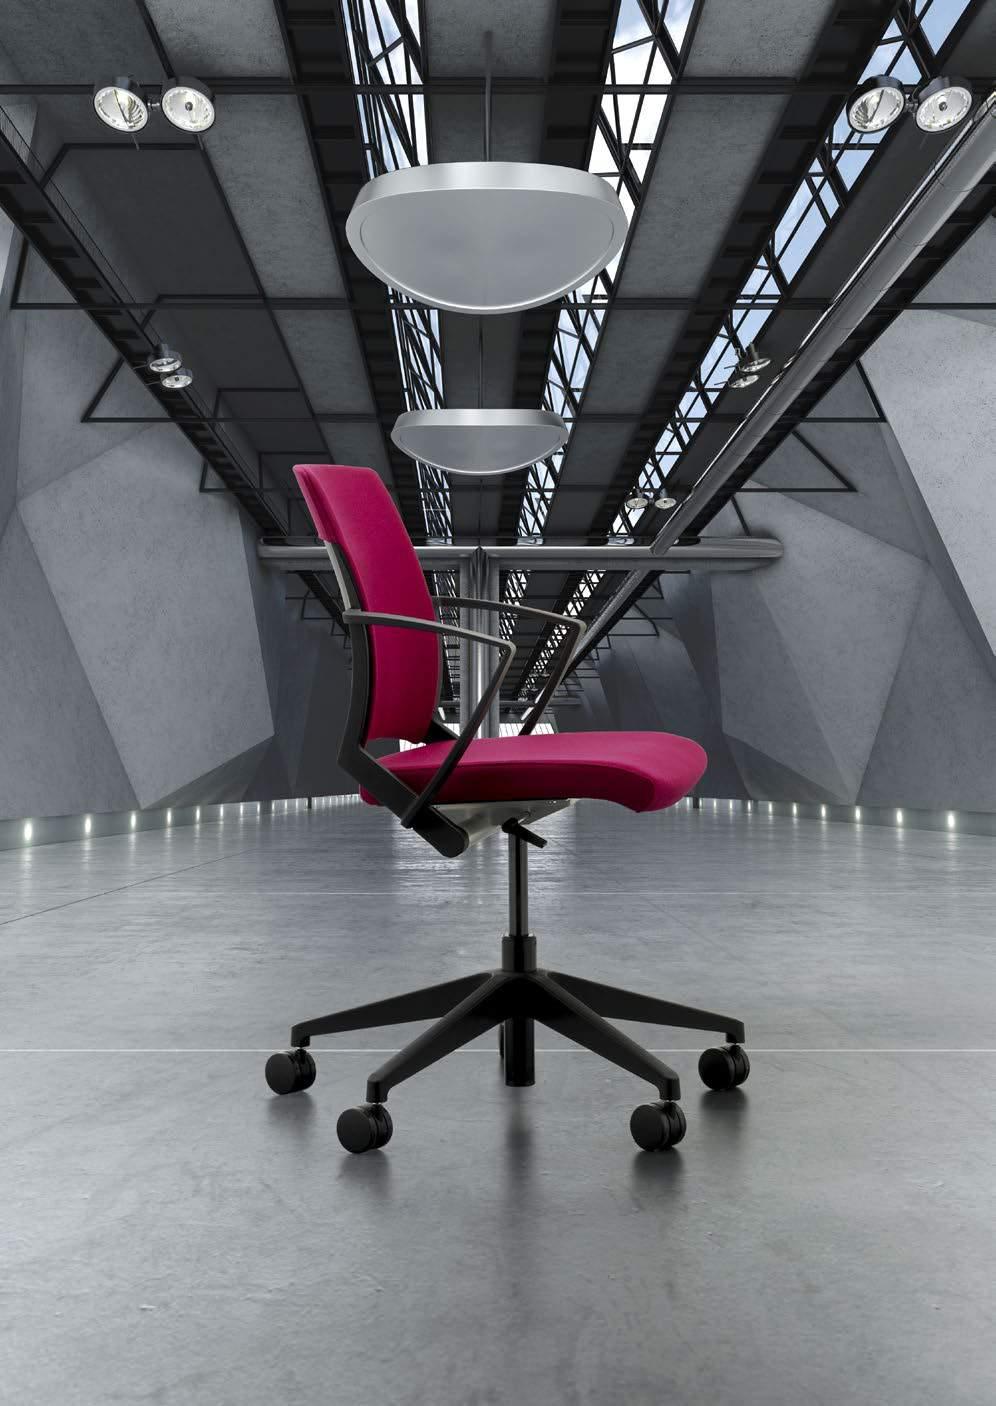 Cube_ Work seating designed by Verco The Cube chair s linear design,